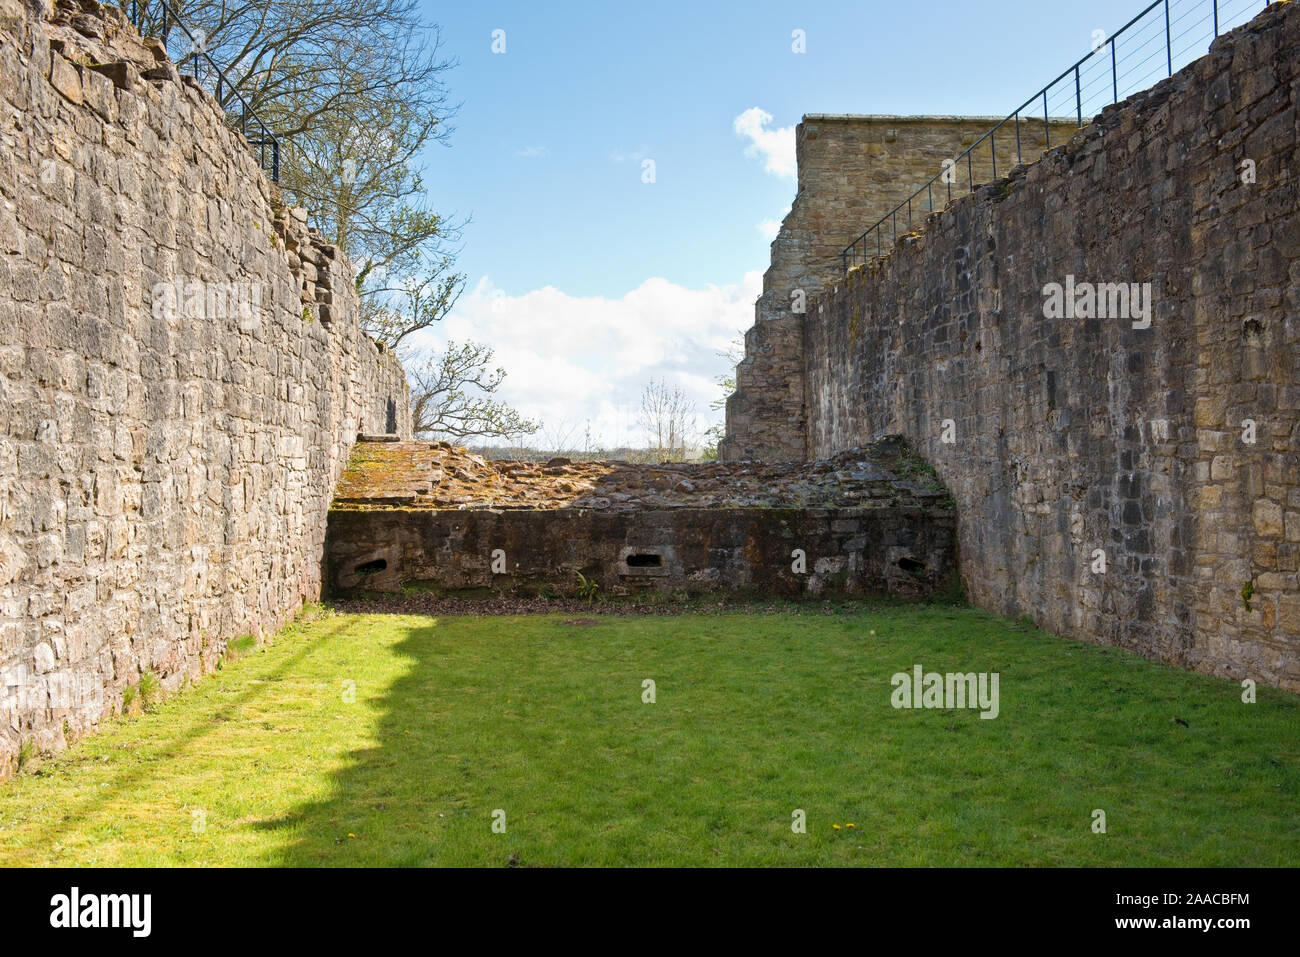 Well preserved, covered caponier, defensive ditch and enclosing high walls in Craignethan Castle. South Lanarkshire, Scotland Stock Photo